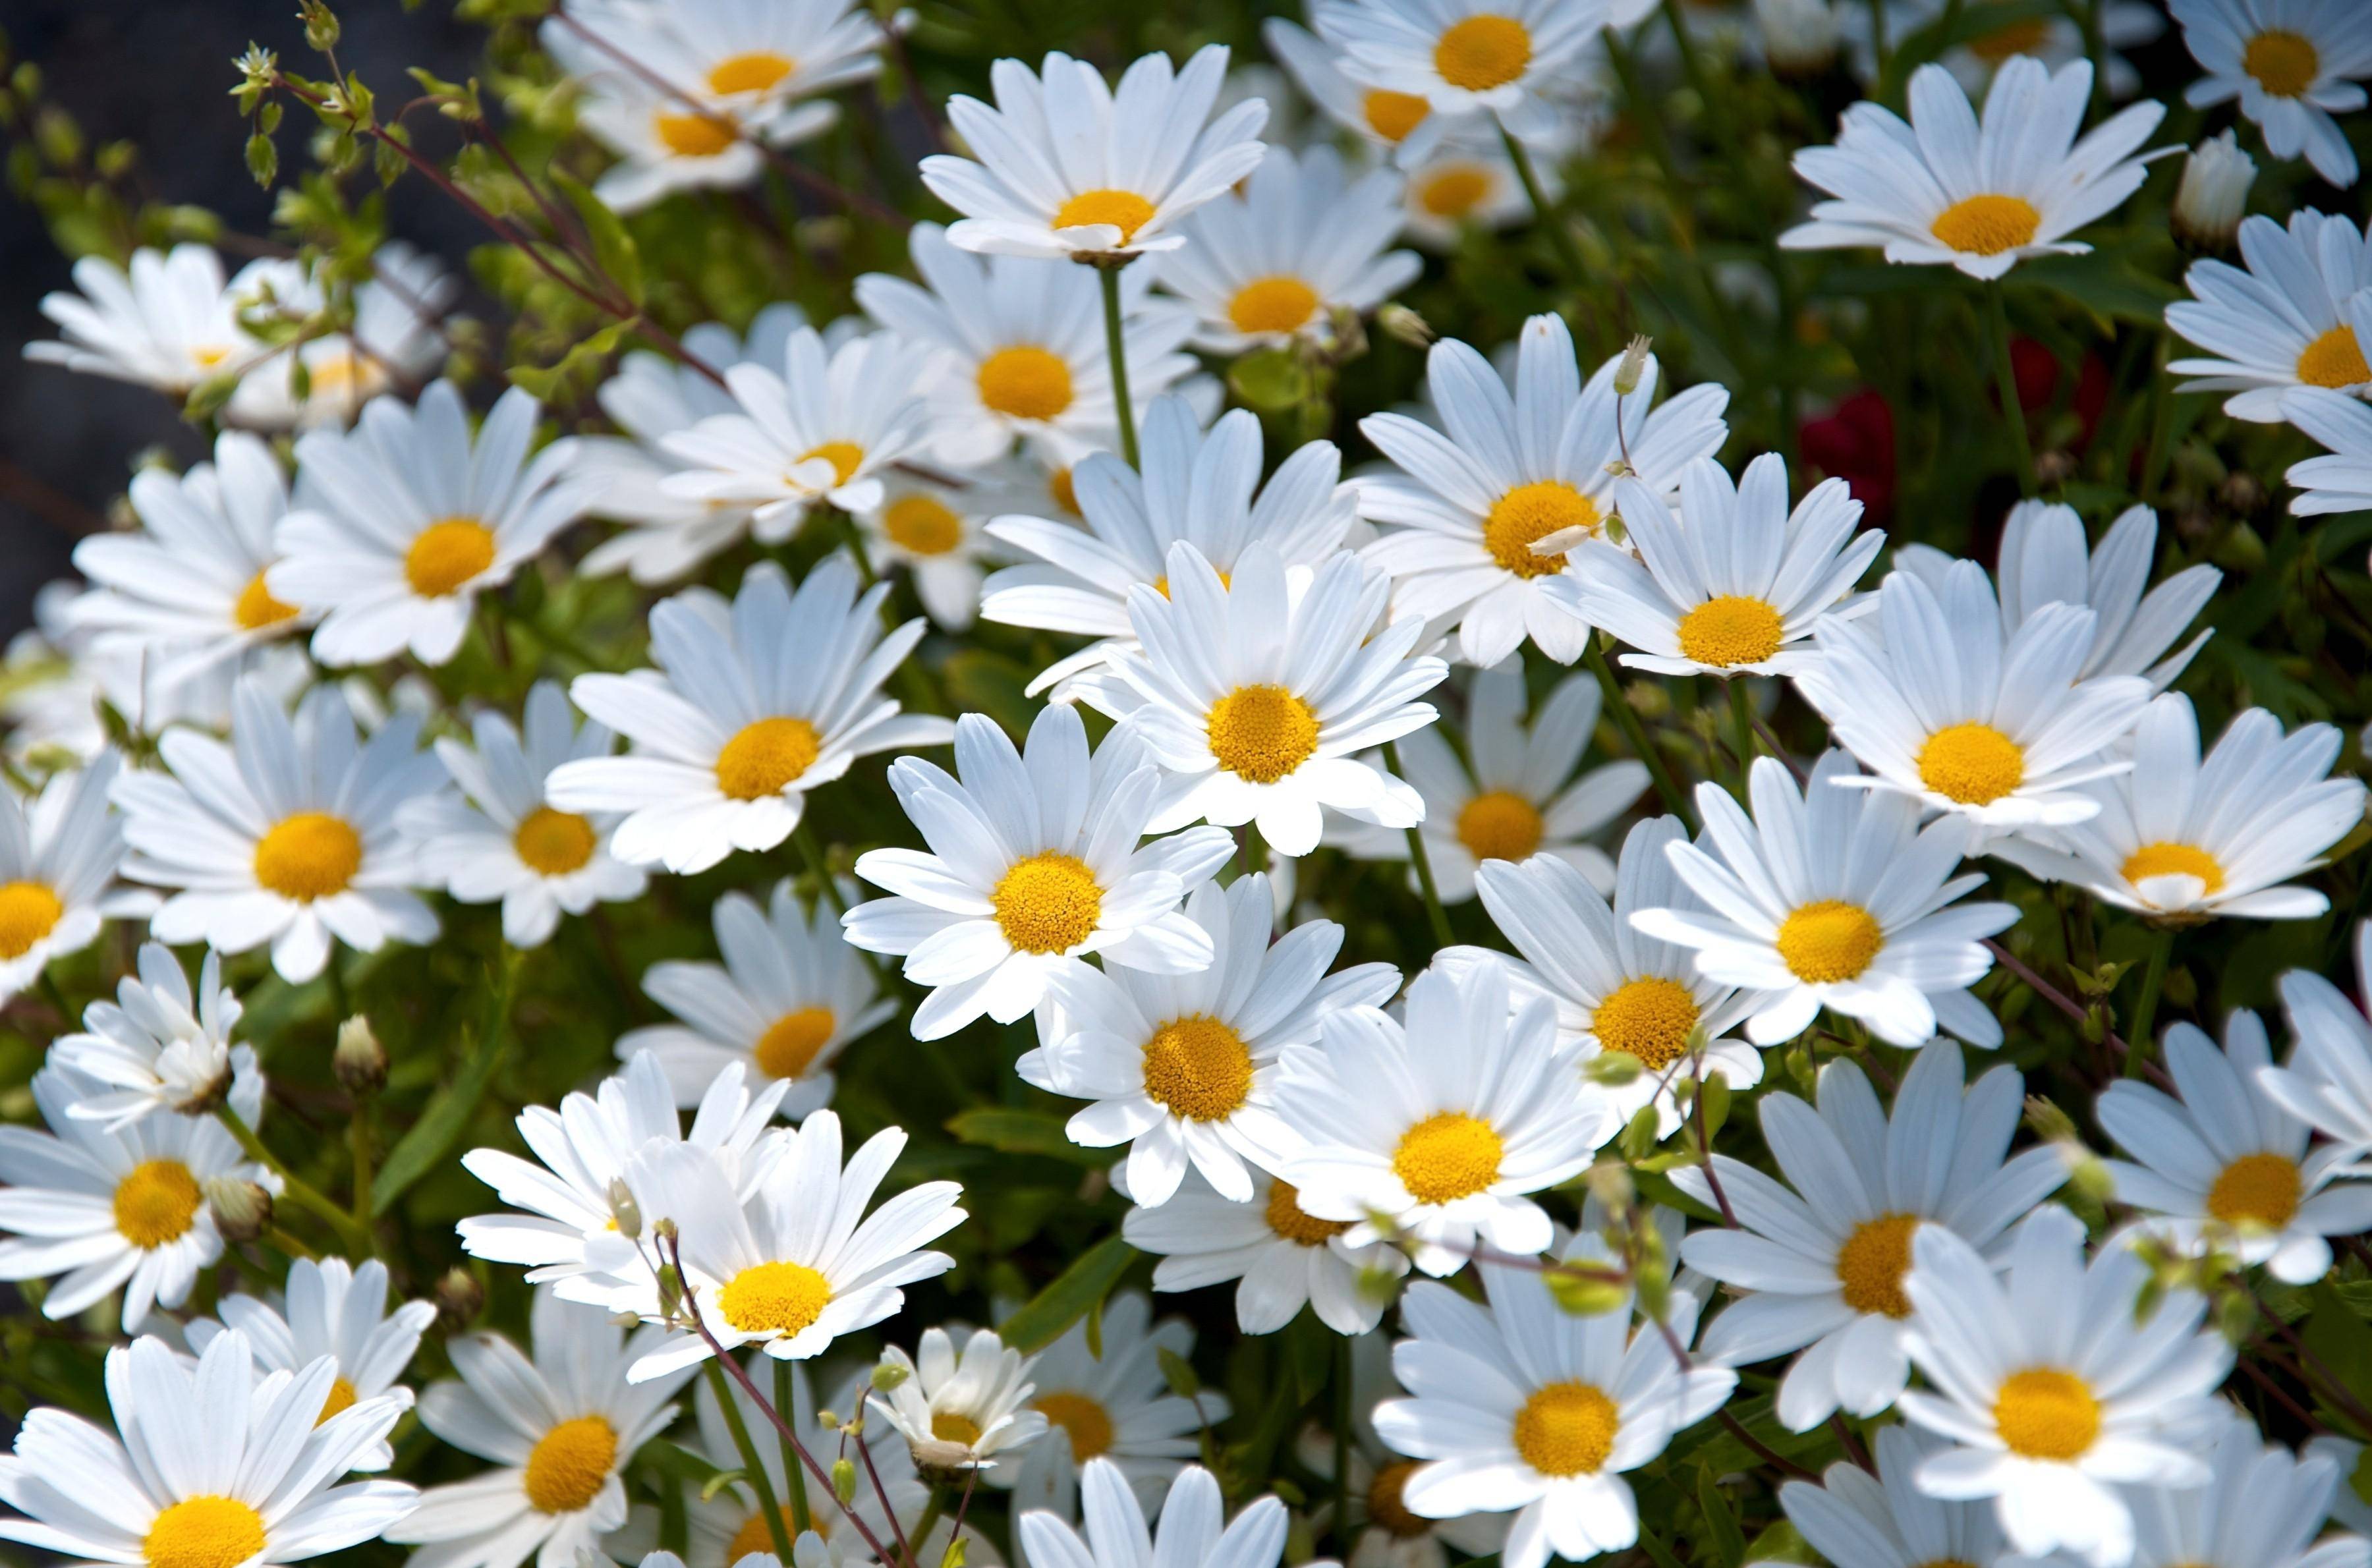 Wallpapers For > Daisy Wallpapers Tumblr